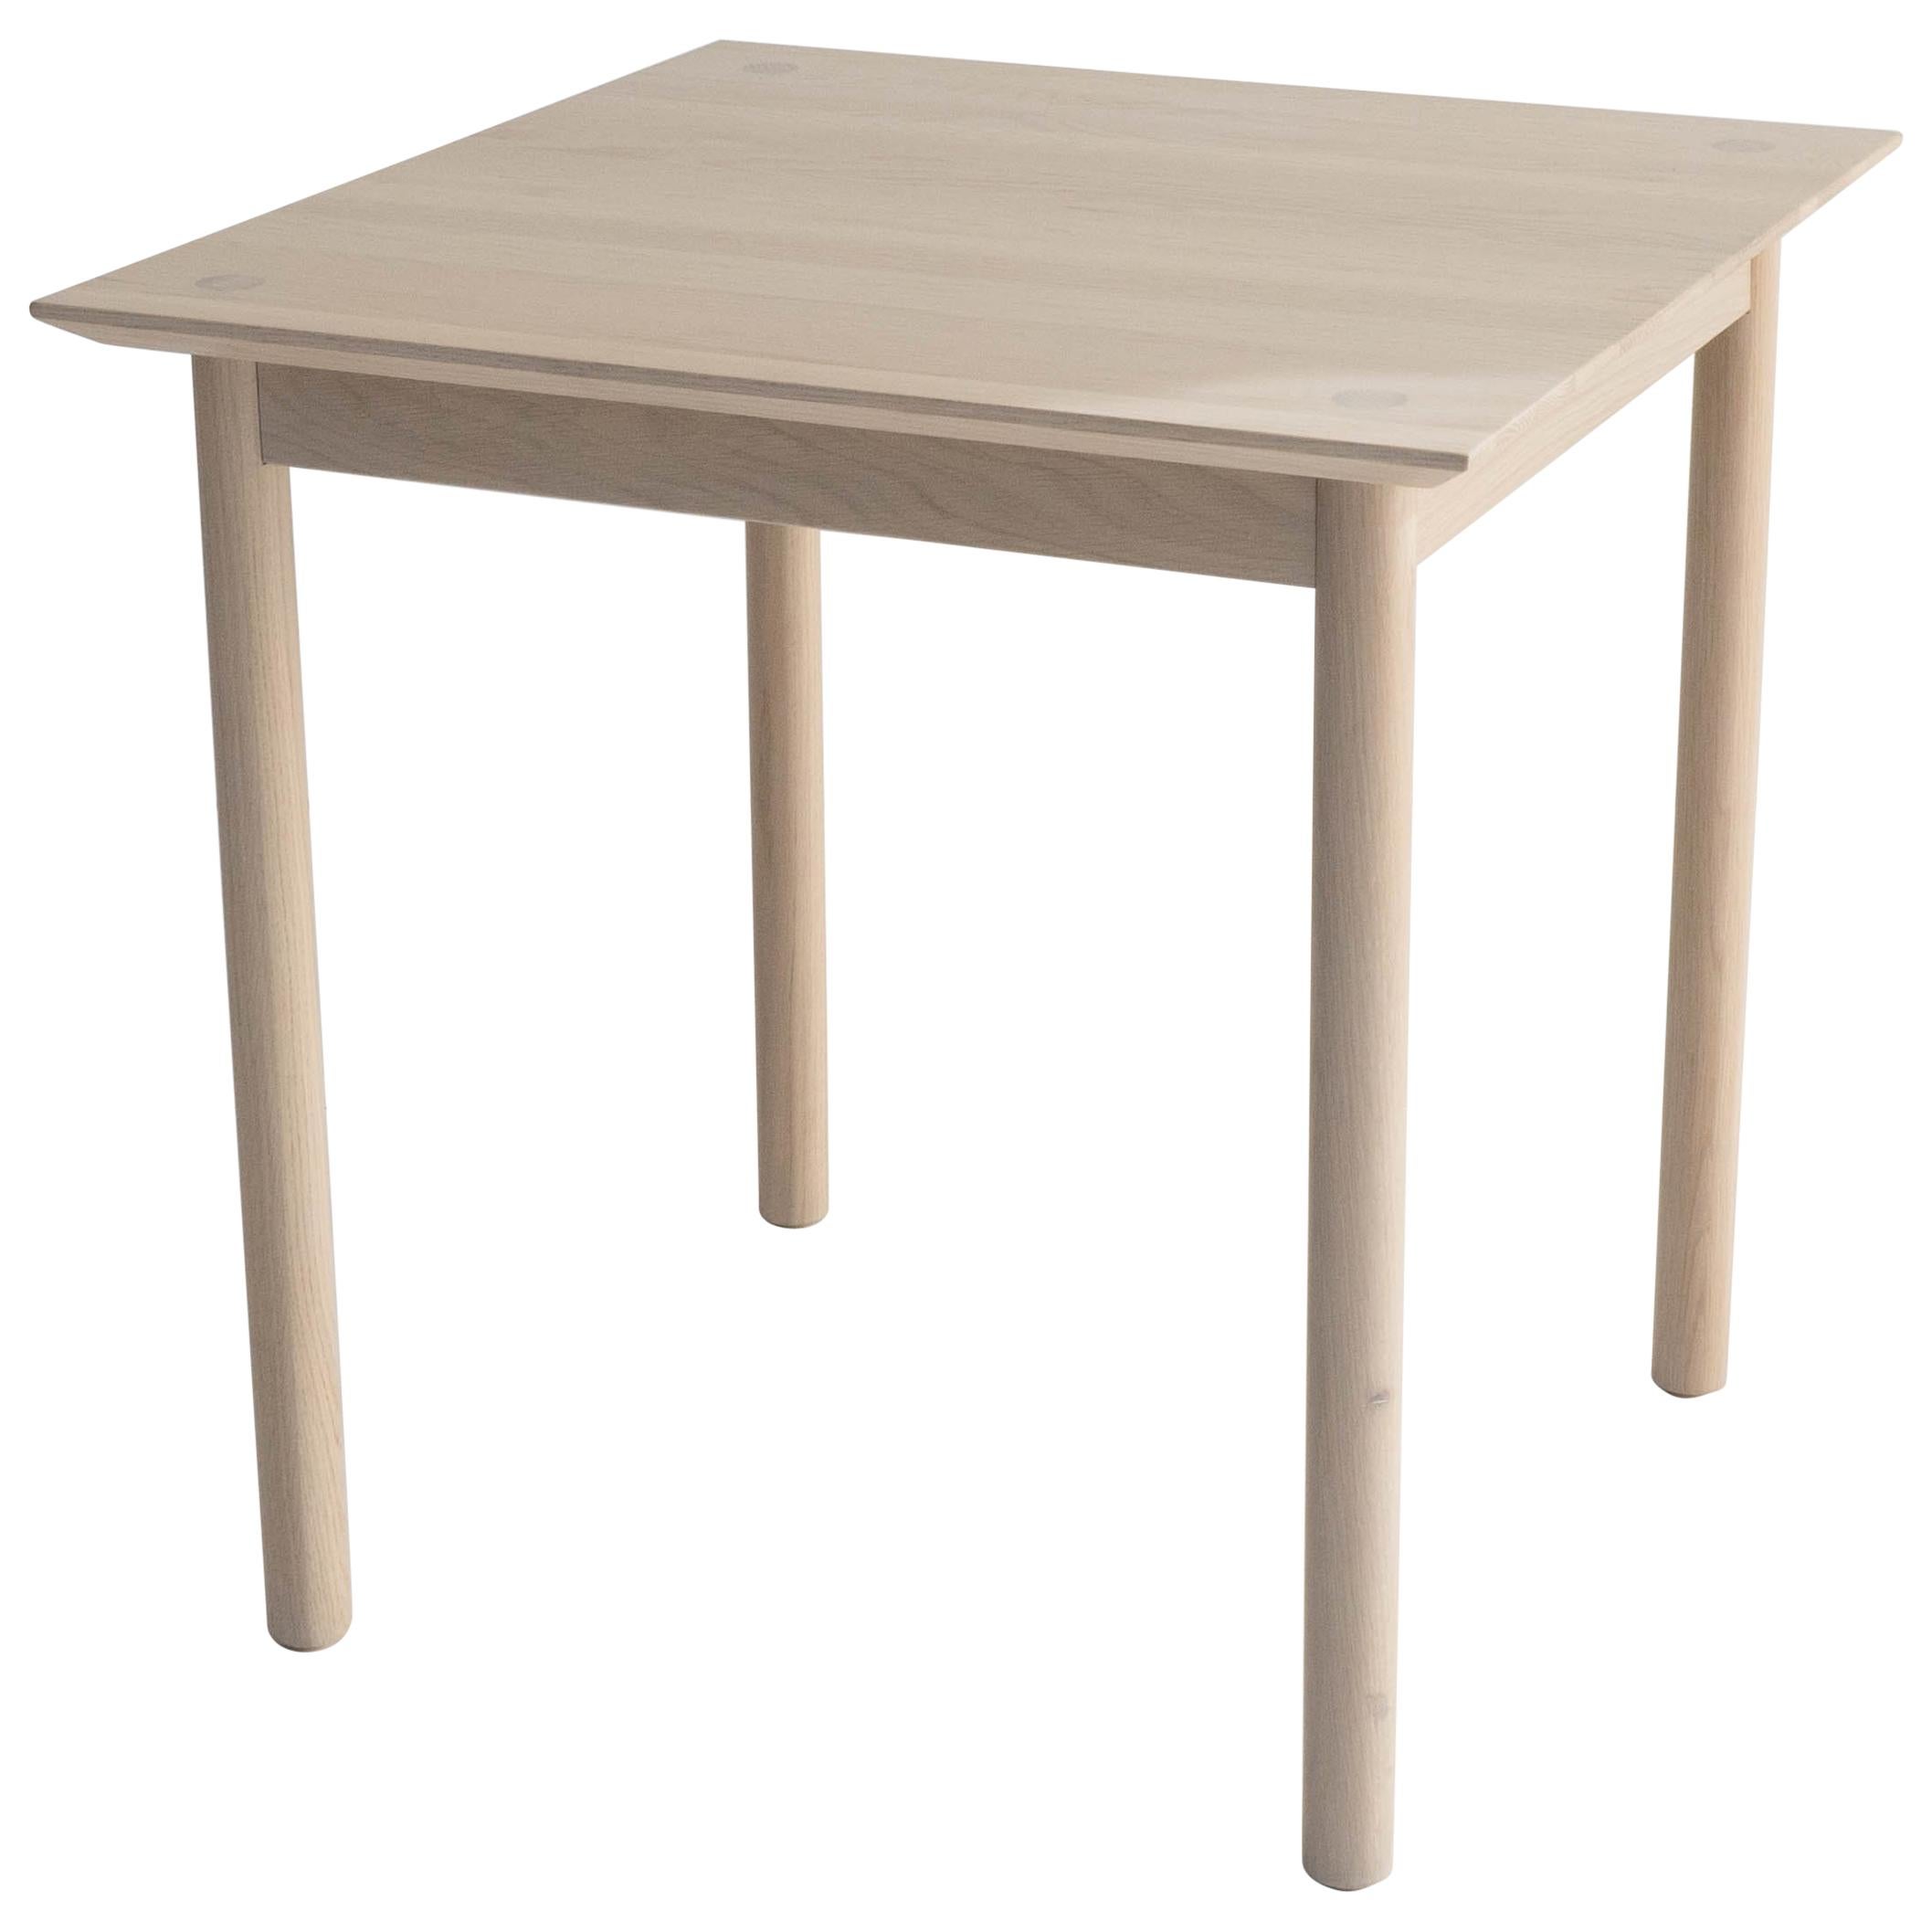 Coast Table Square by Sun at Six, Nude Minimalist Dining Table or Desk in Wood